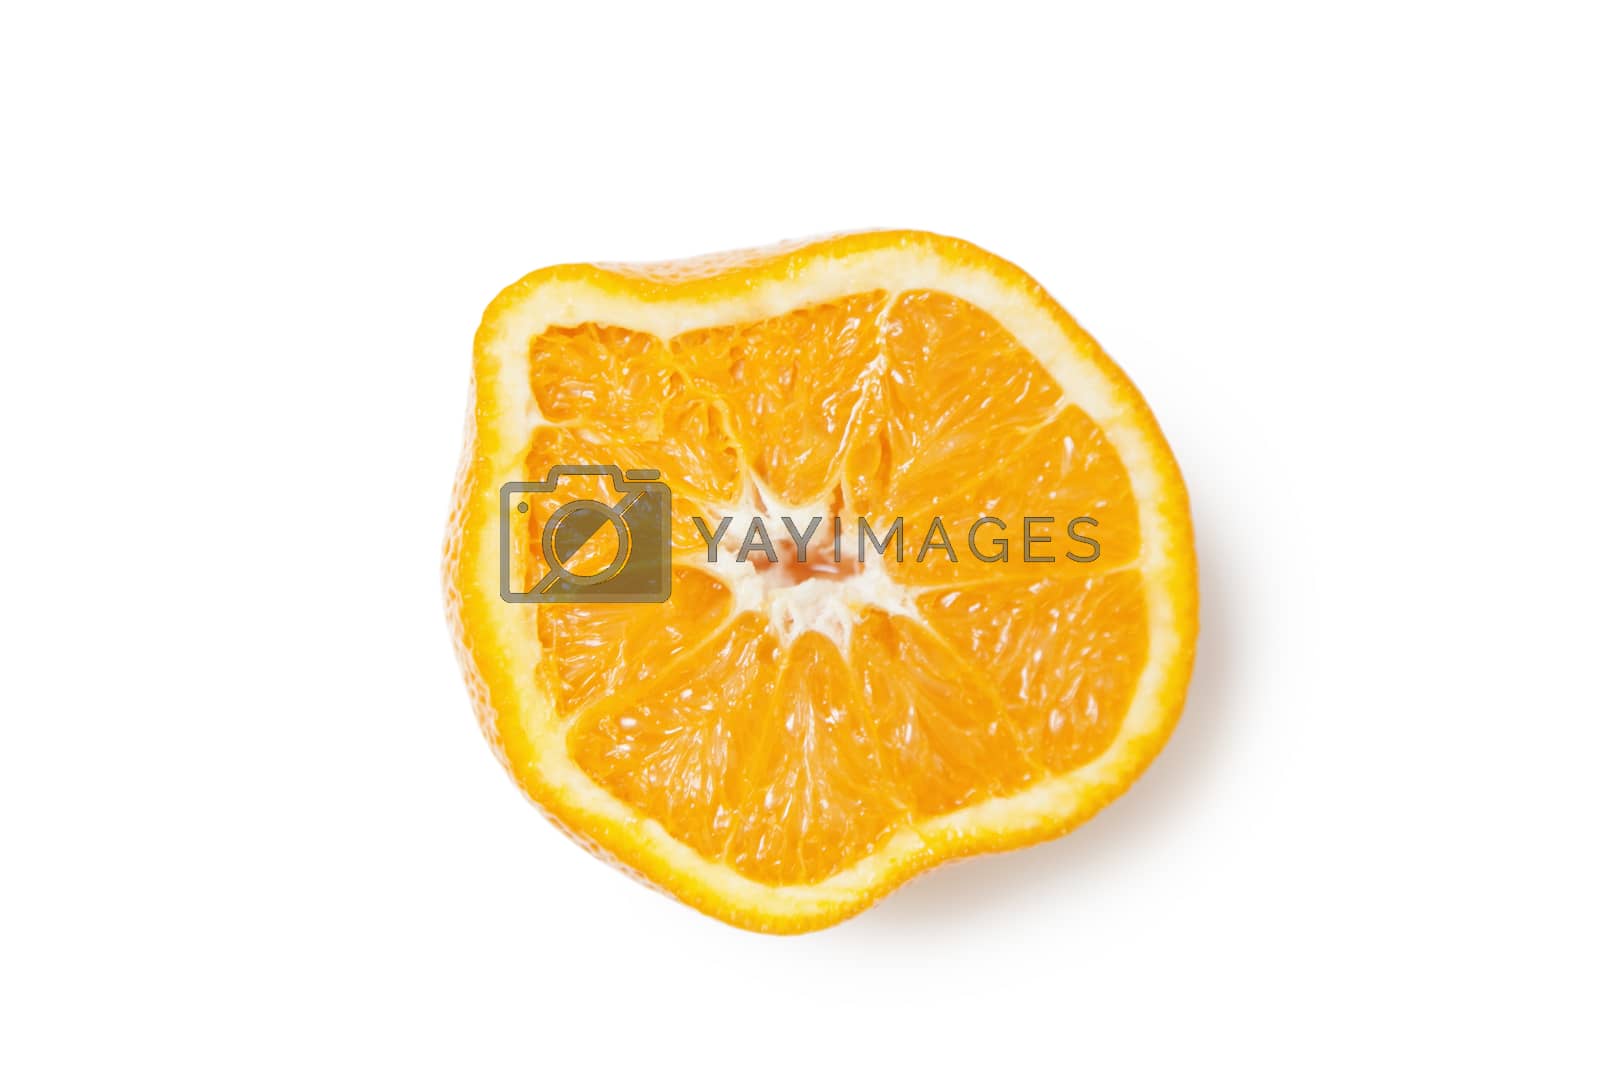 Royalty free image of Cross section of a squeezed orange slice over white background by moodboard